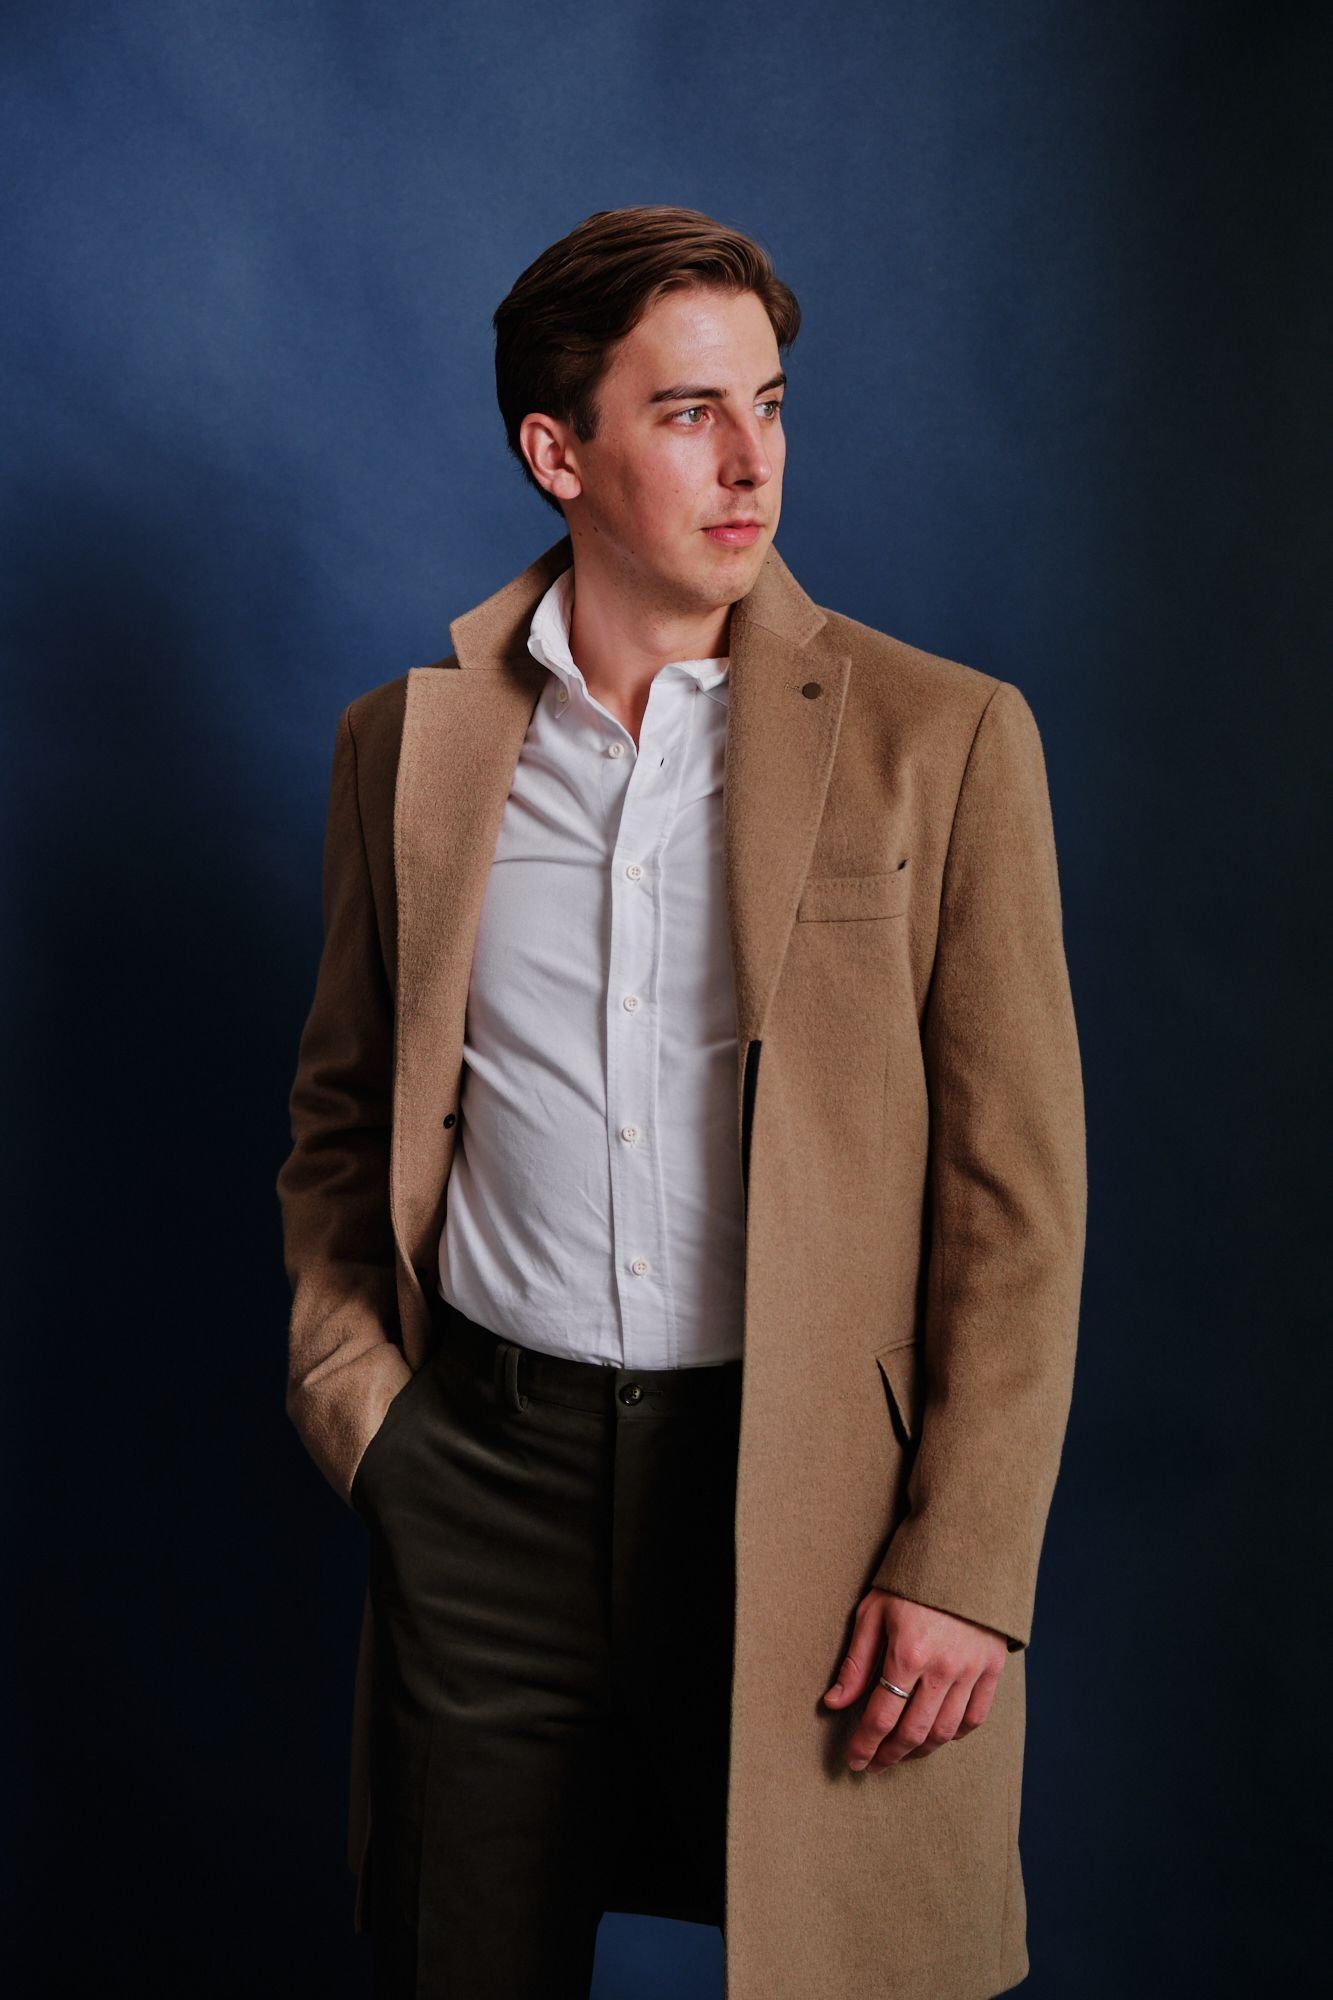 A man wearing a tan coat and a white shirt is standing with his hands in his pockets.